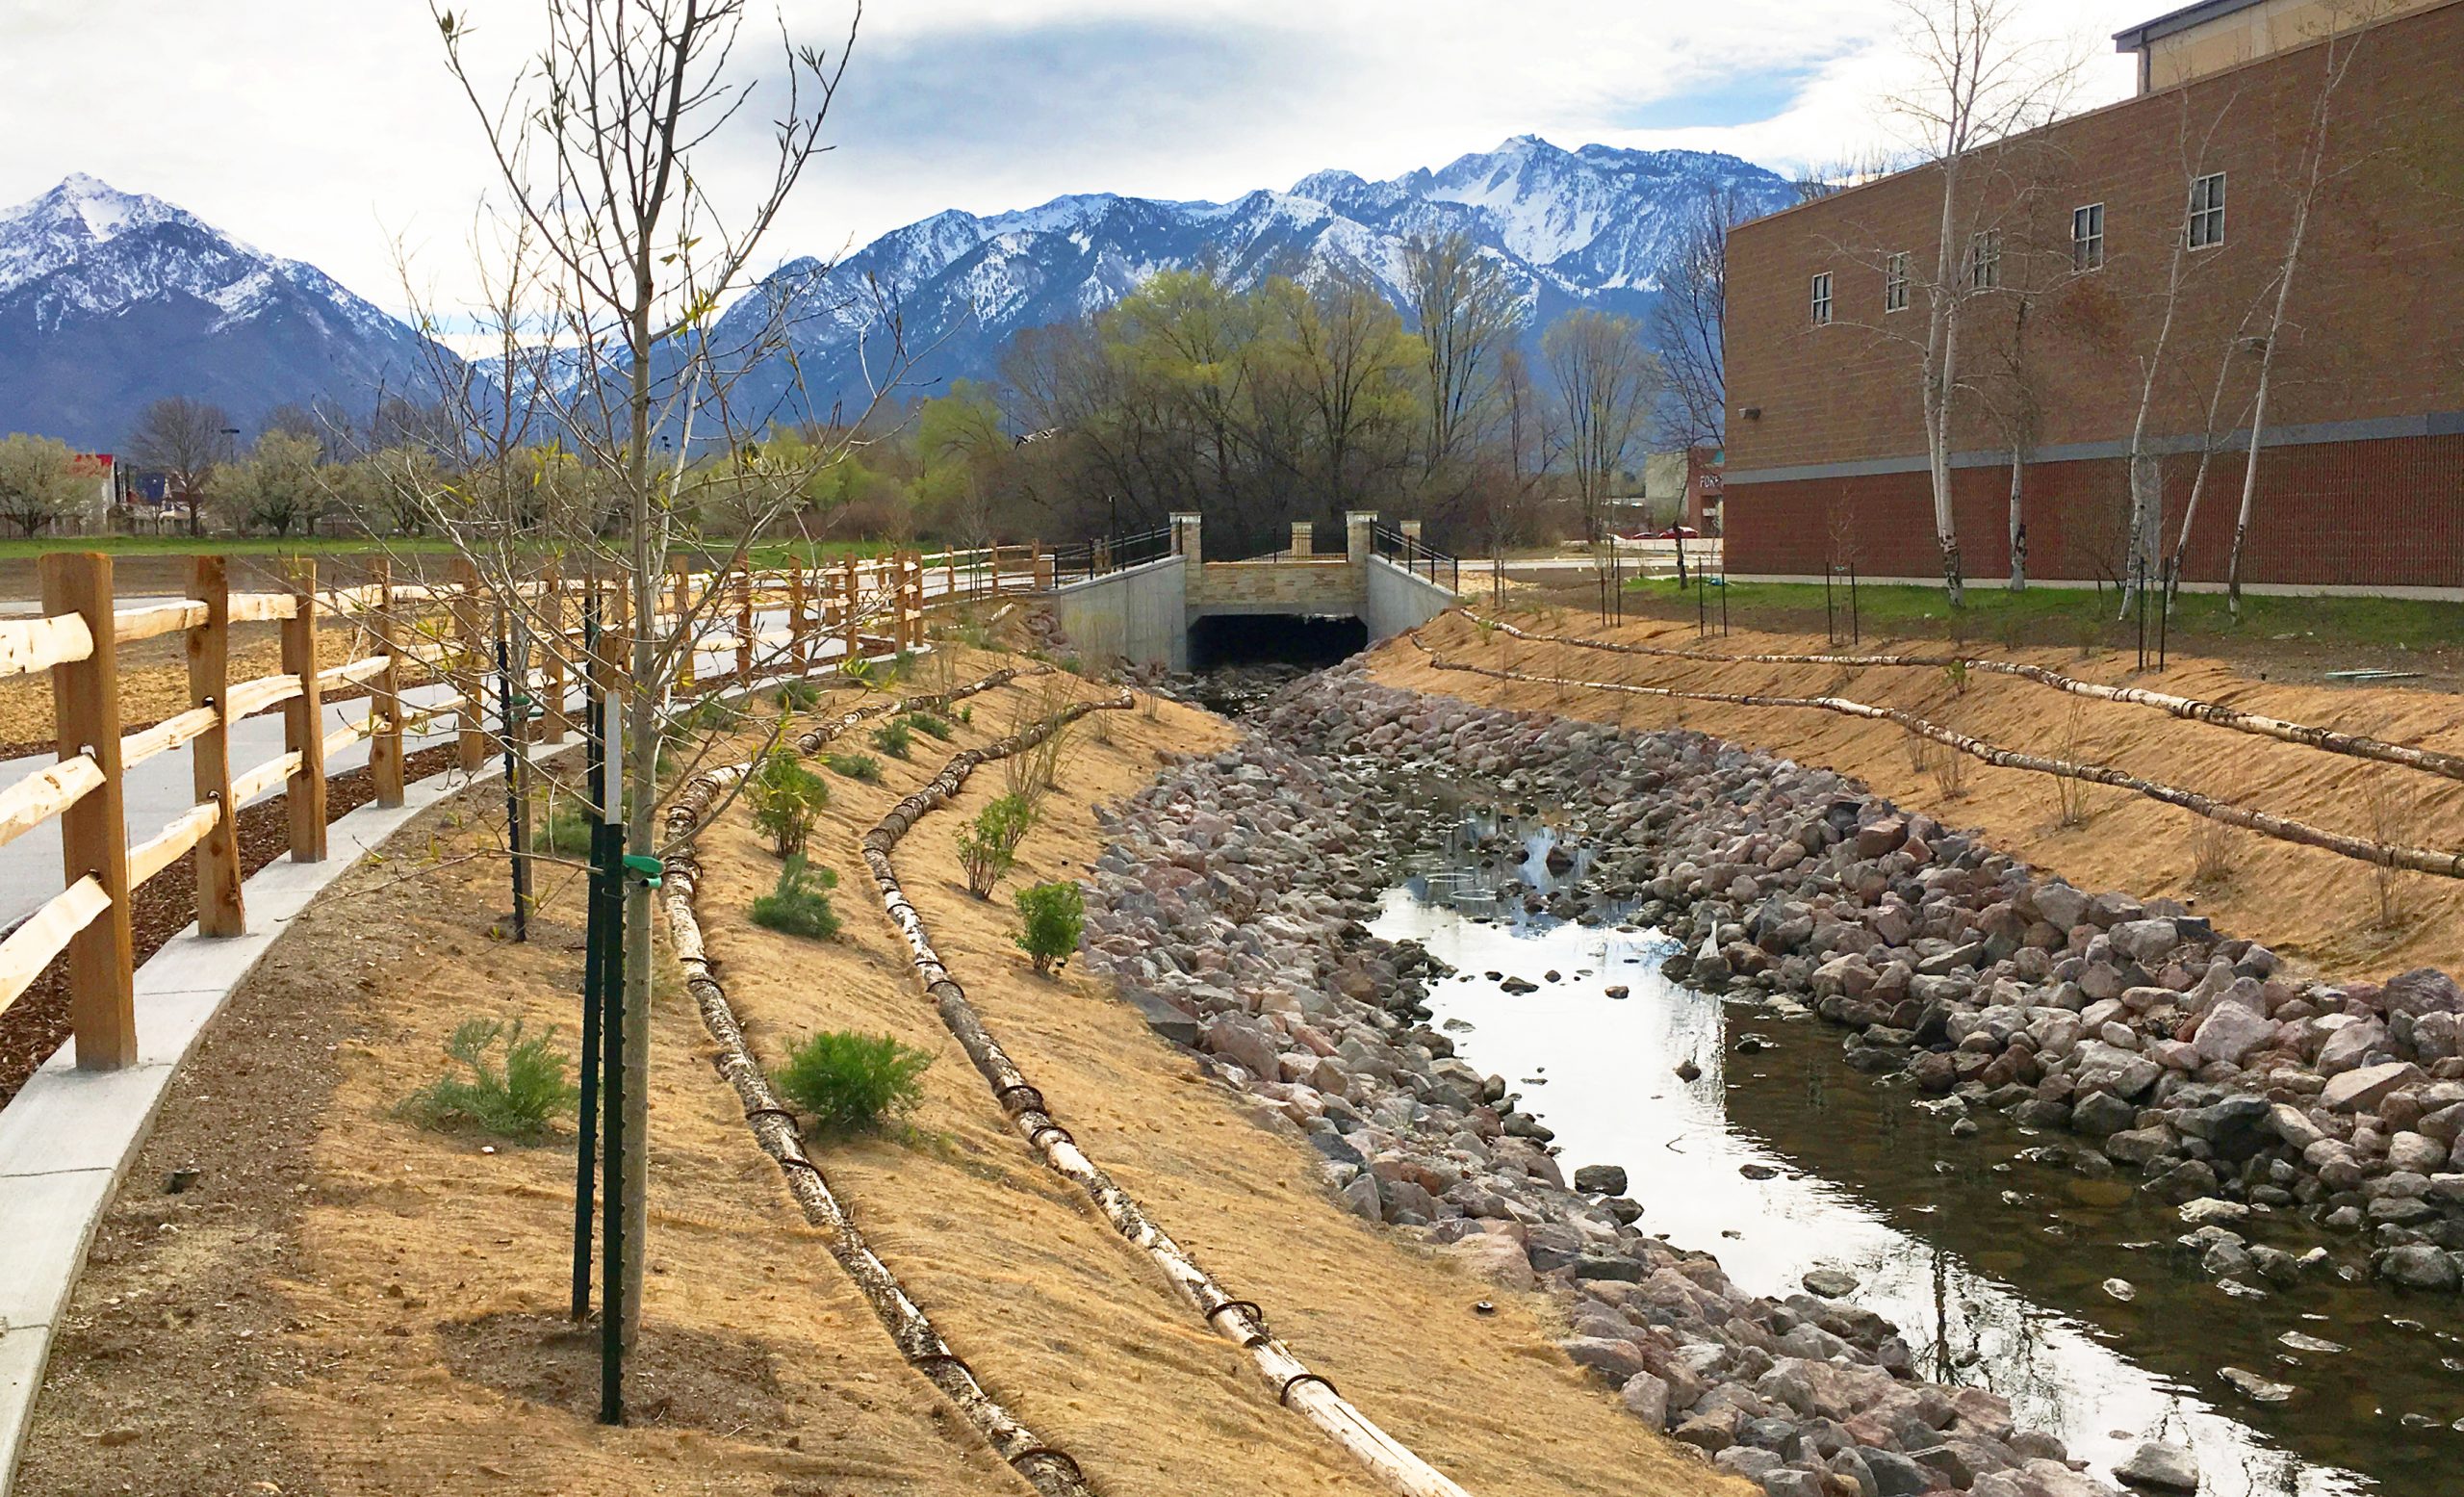 Dry Creek channel with mountains in the background and brick building beside it.